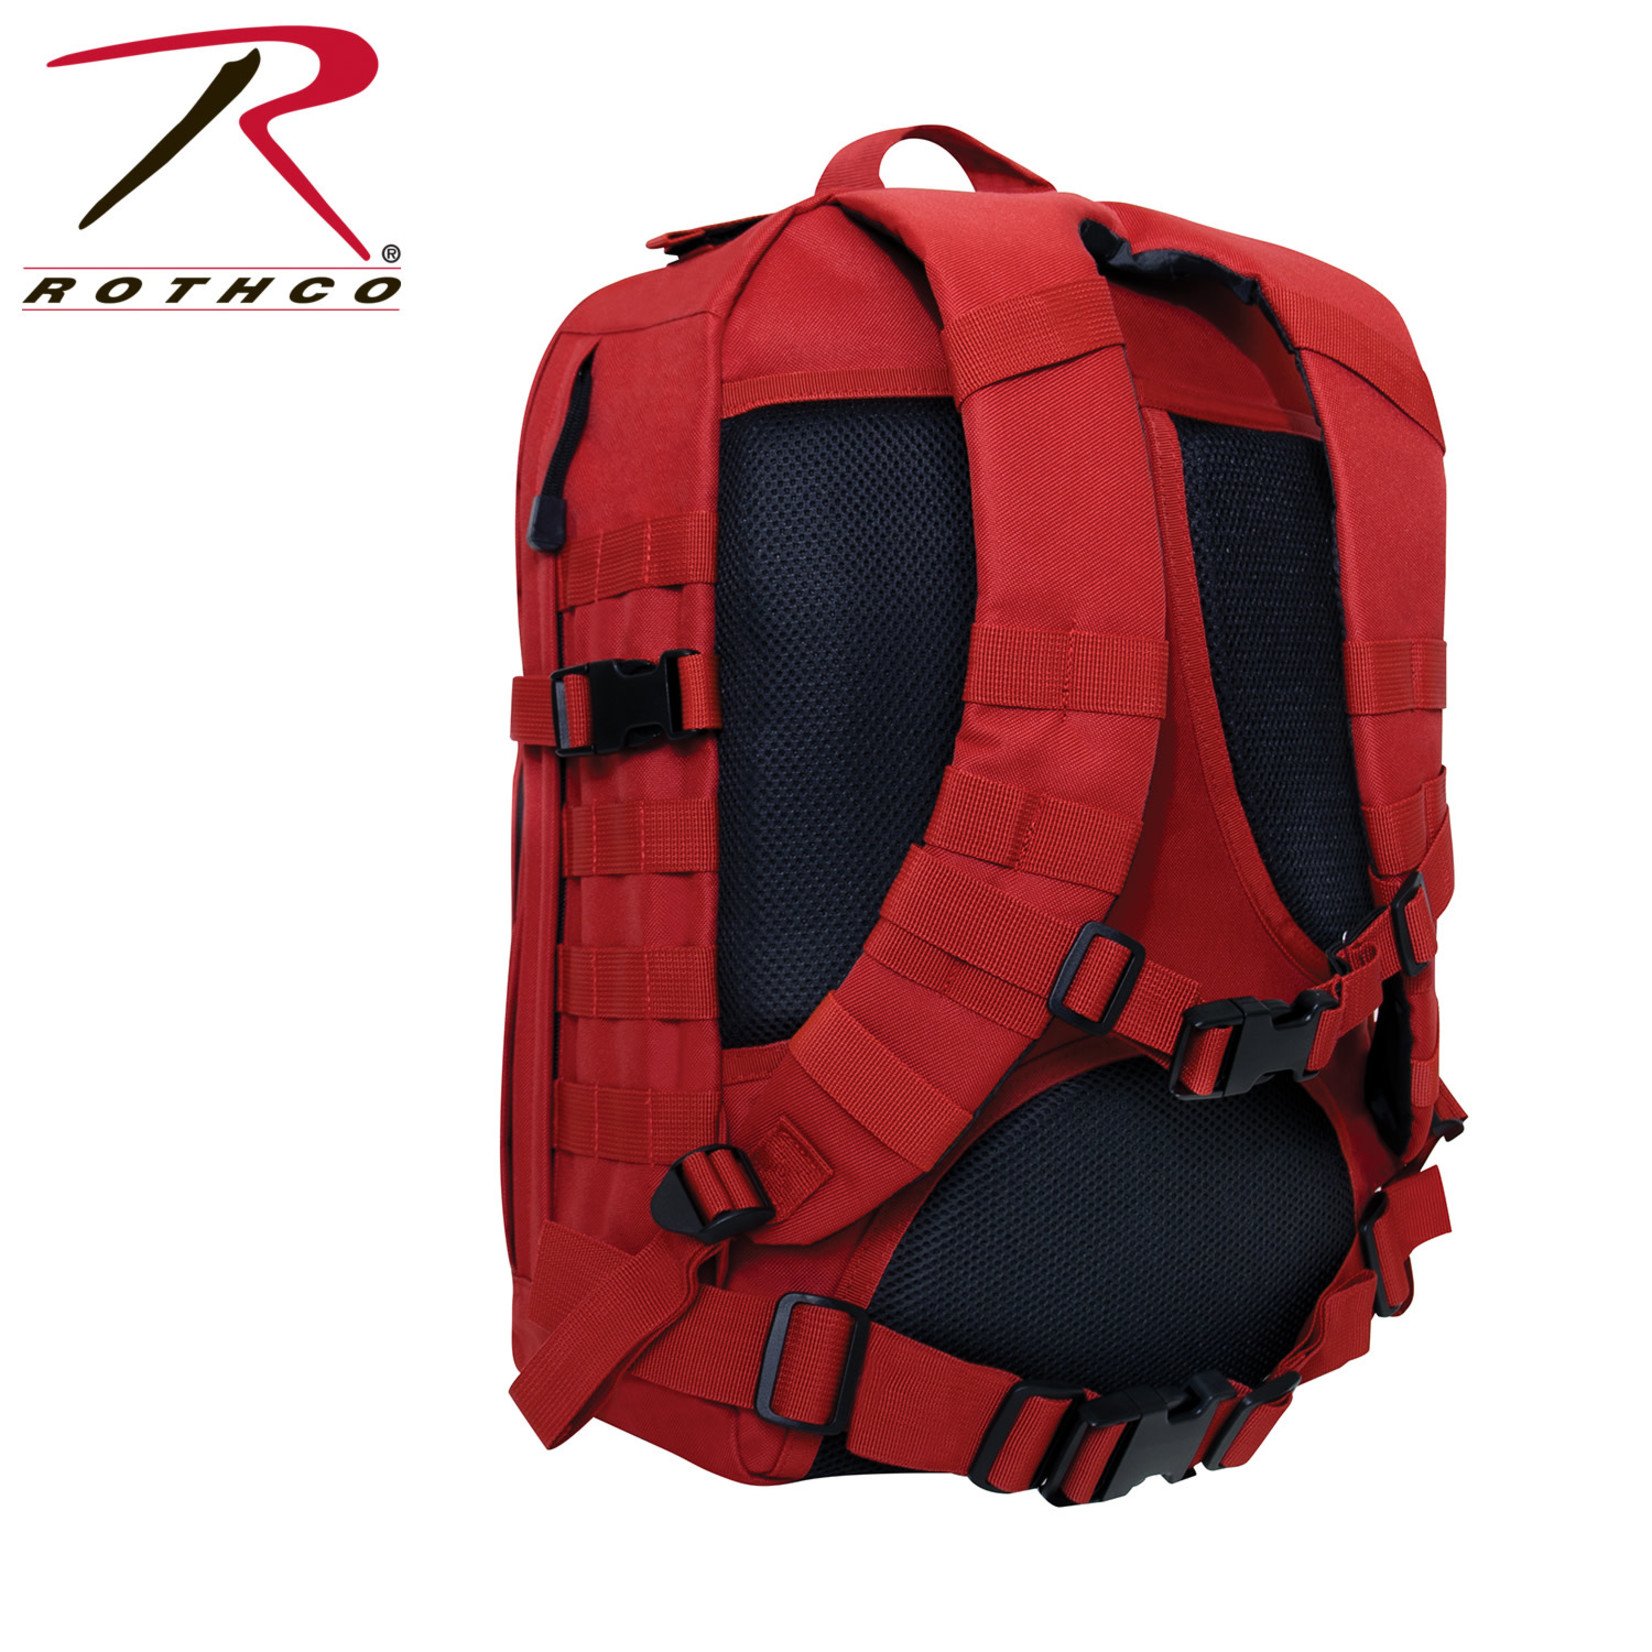 Rothco Rothco Fast Mover MOLLE Backpack - Red